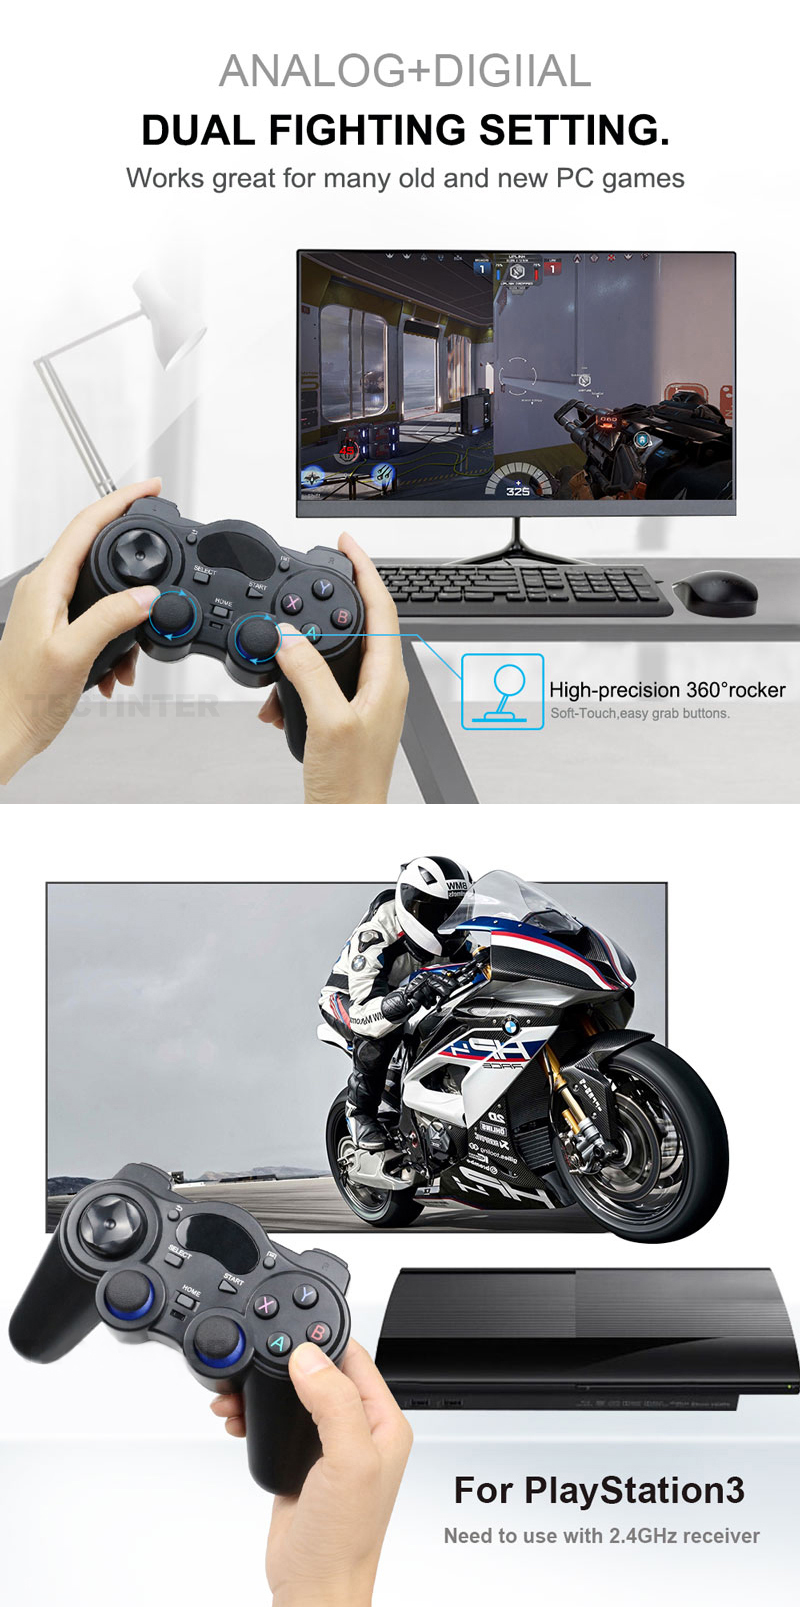 Bakeey-24G-Wireless-Game-Controller-Gamepad-Joystick-Joypad-for-PS3-for-Android-TV-Box-Tablets-1867145-1